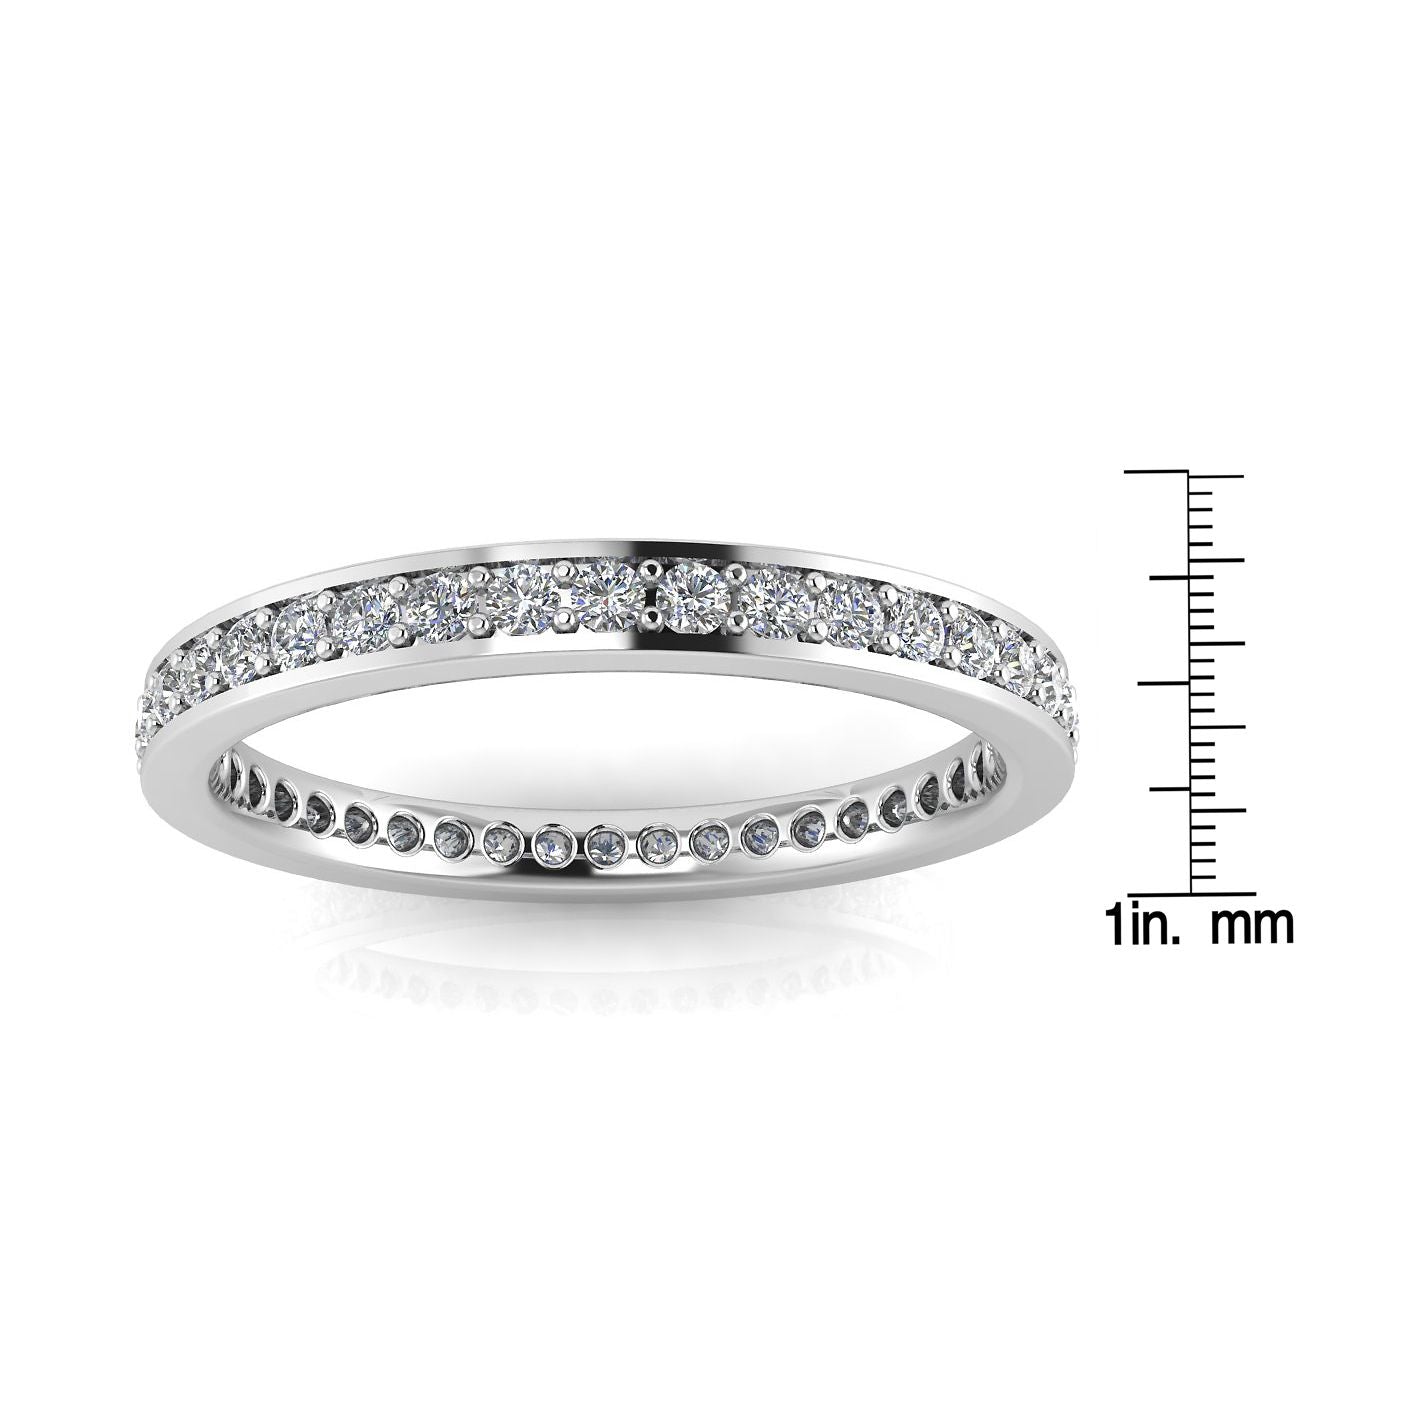 Round Brilliant Cut Diamond Channel Pave Set Eternity Ring In Platinum  (0.29ct. Tw.) Ring Size 4.5